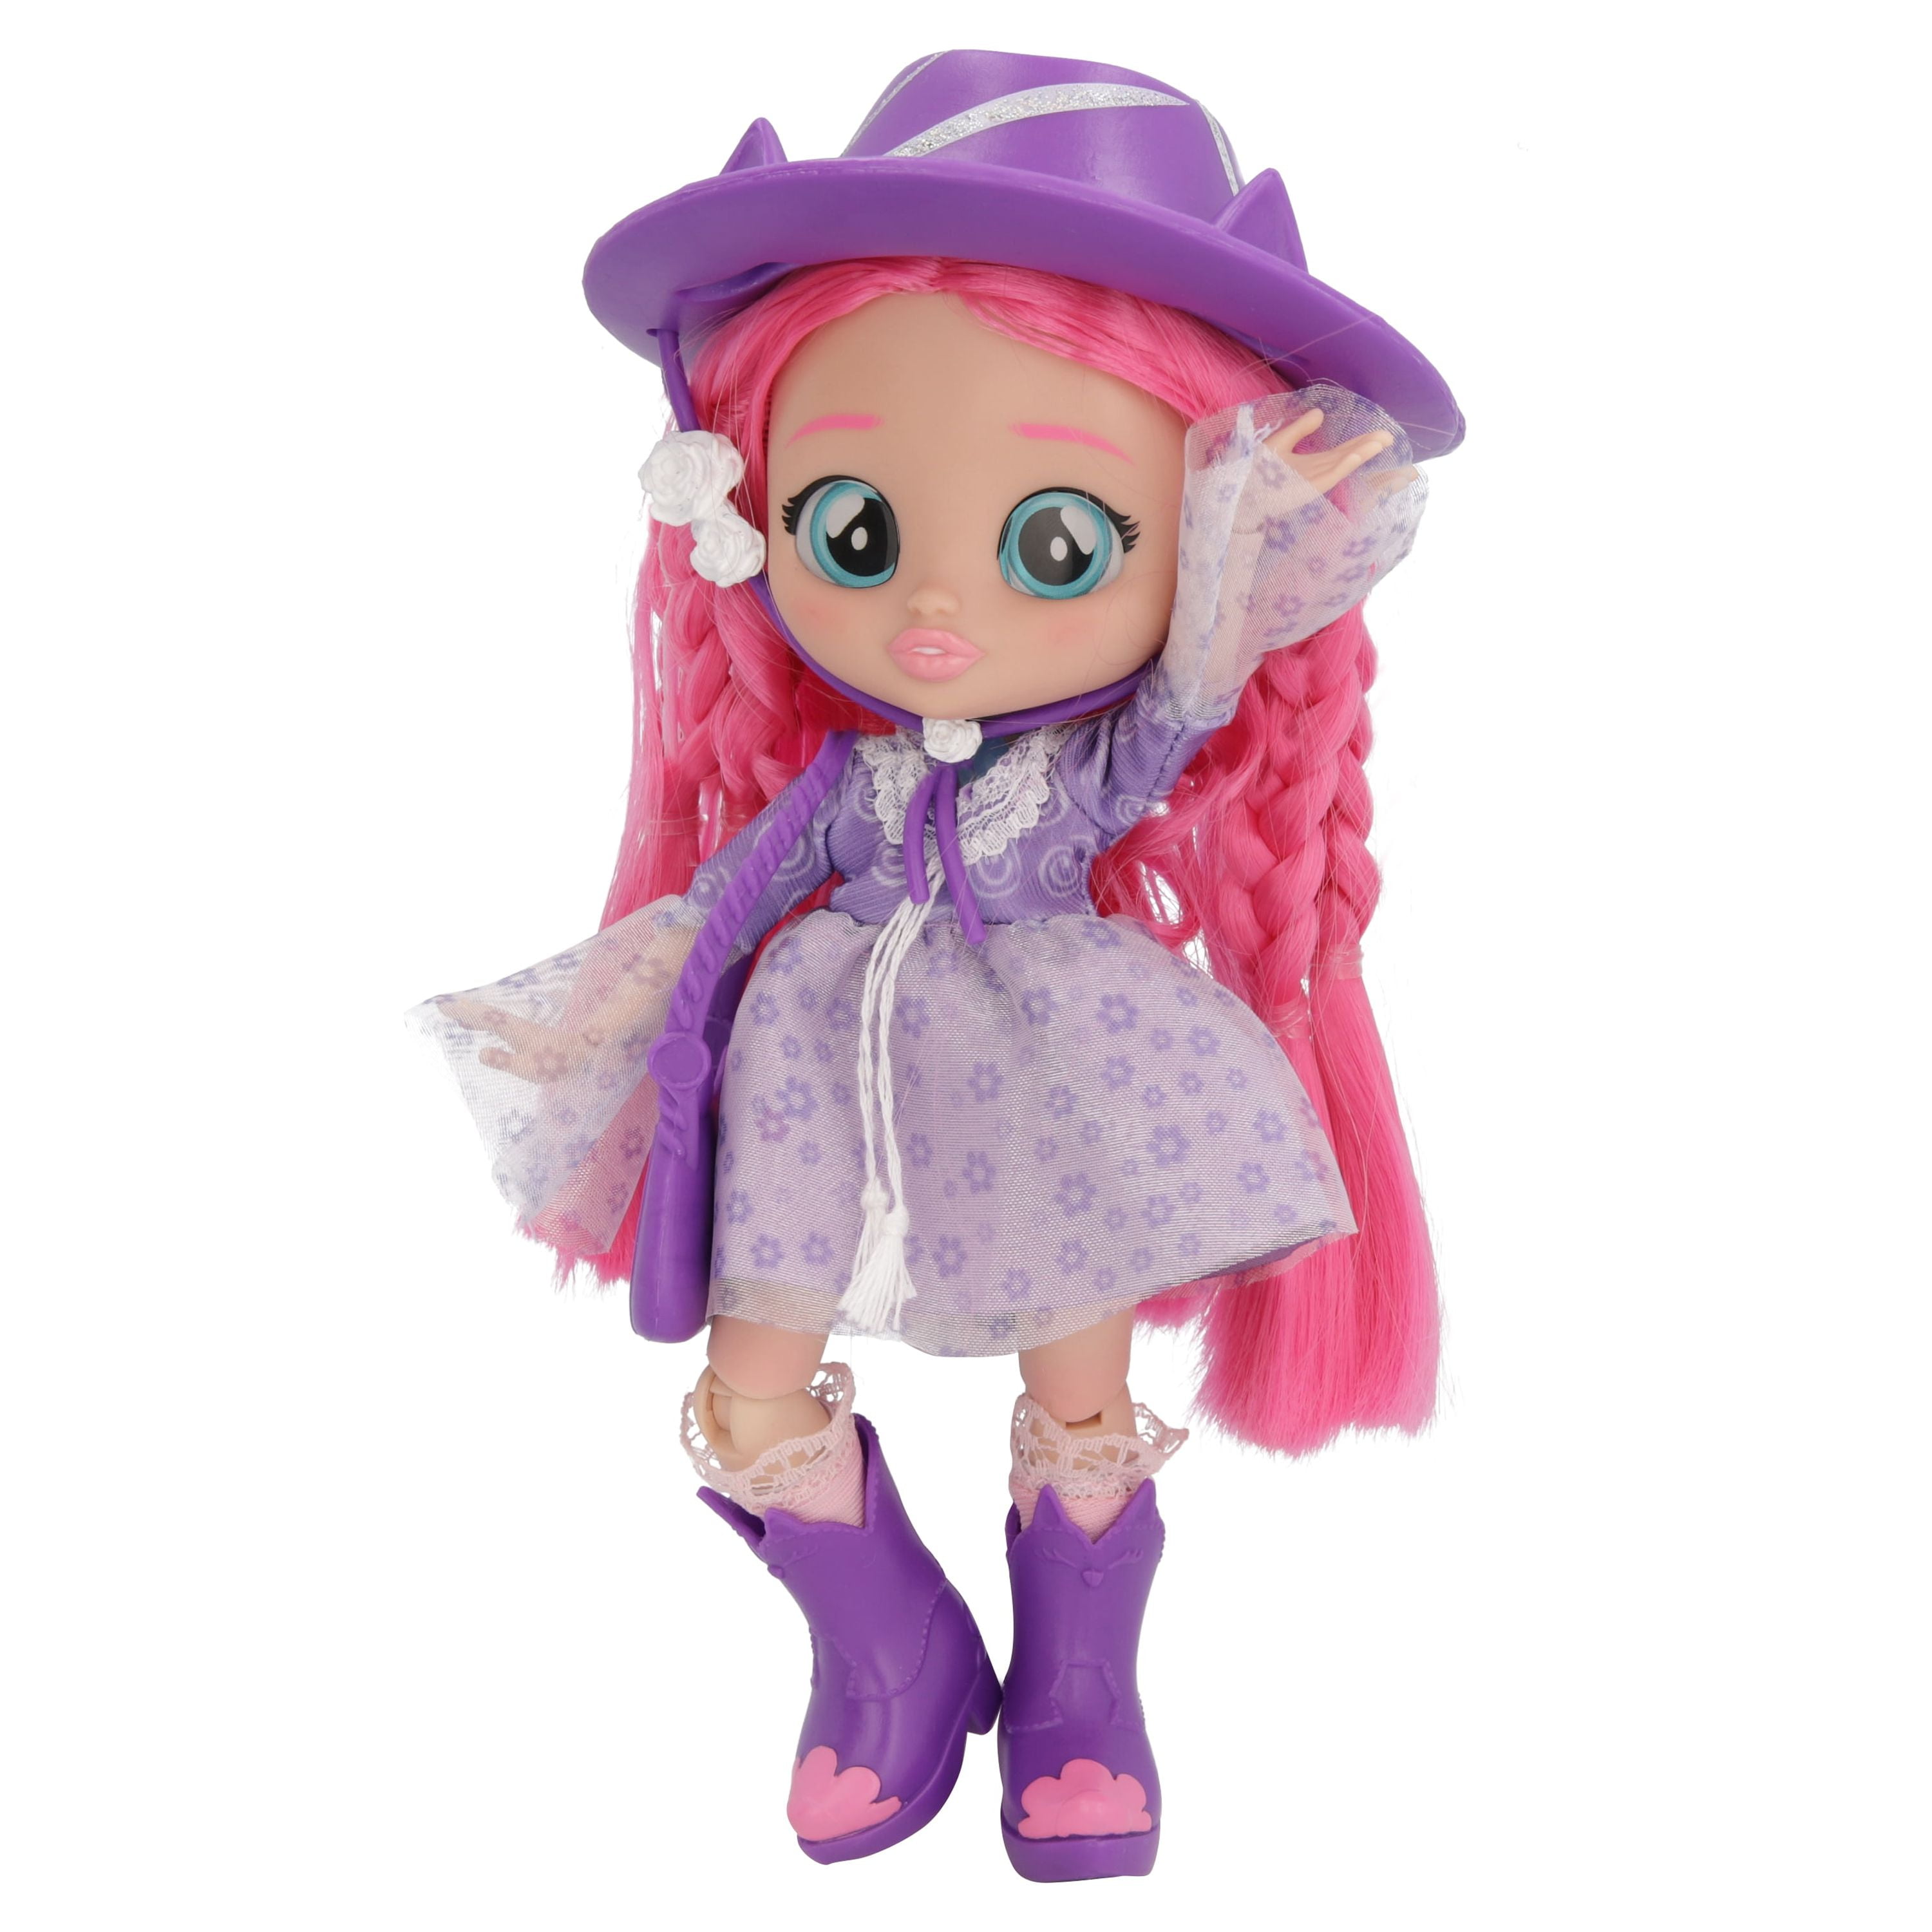 BFF by Cry Babies Jenna 8 inch Fashion Doll for Girls Ages 4+ Years